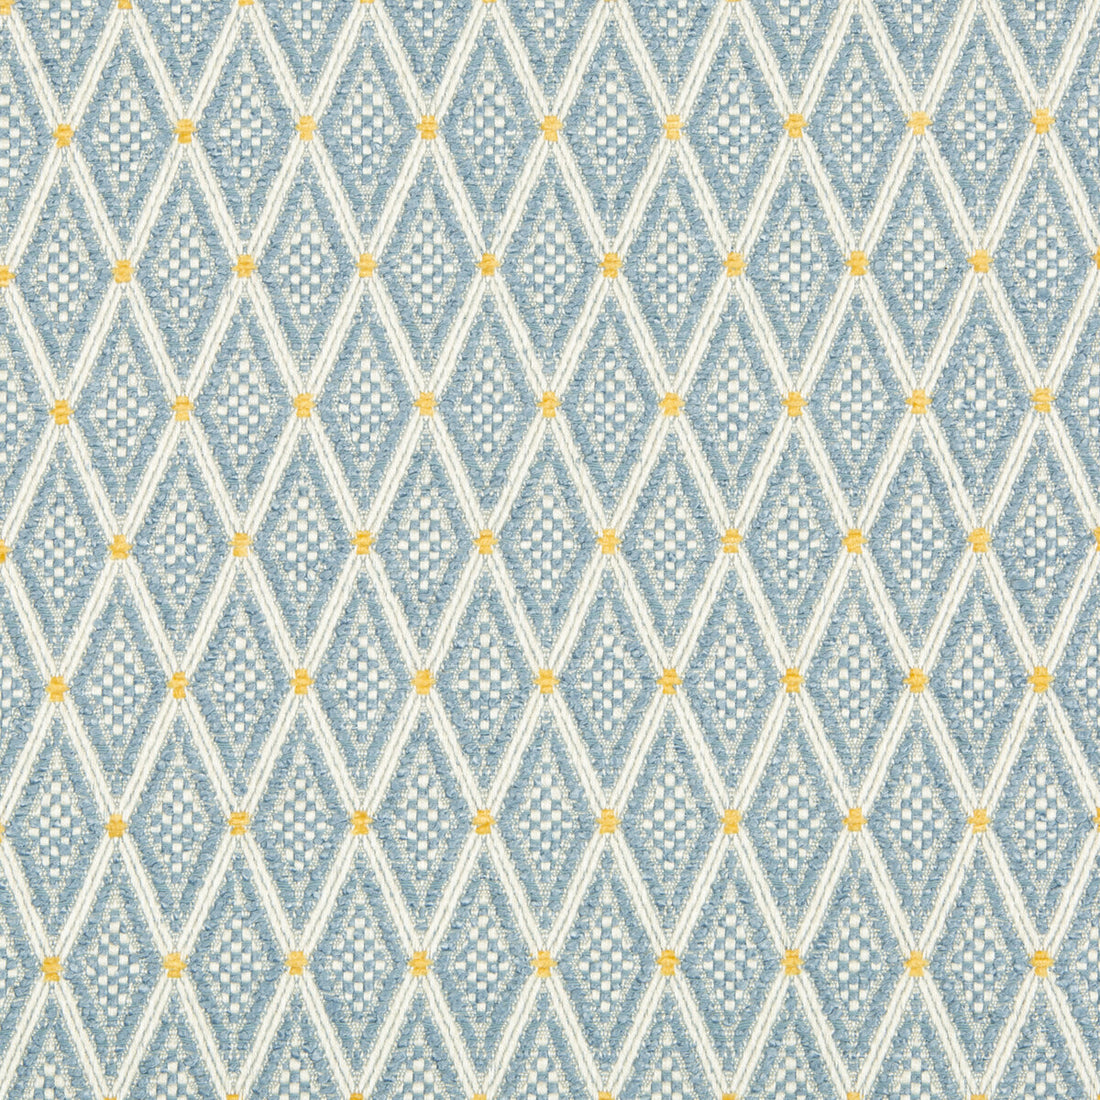 Kravet Contract fabric in 34744-54 color - pattern 34744.54.0 - by Kravet Contract in the Crypton Incase collection